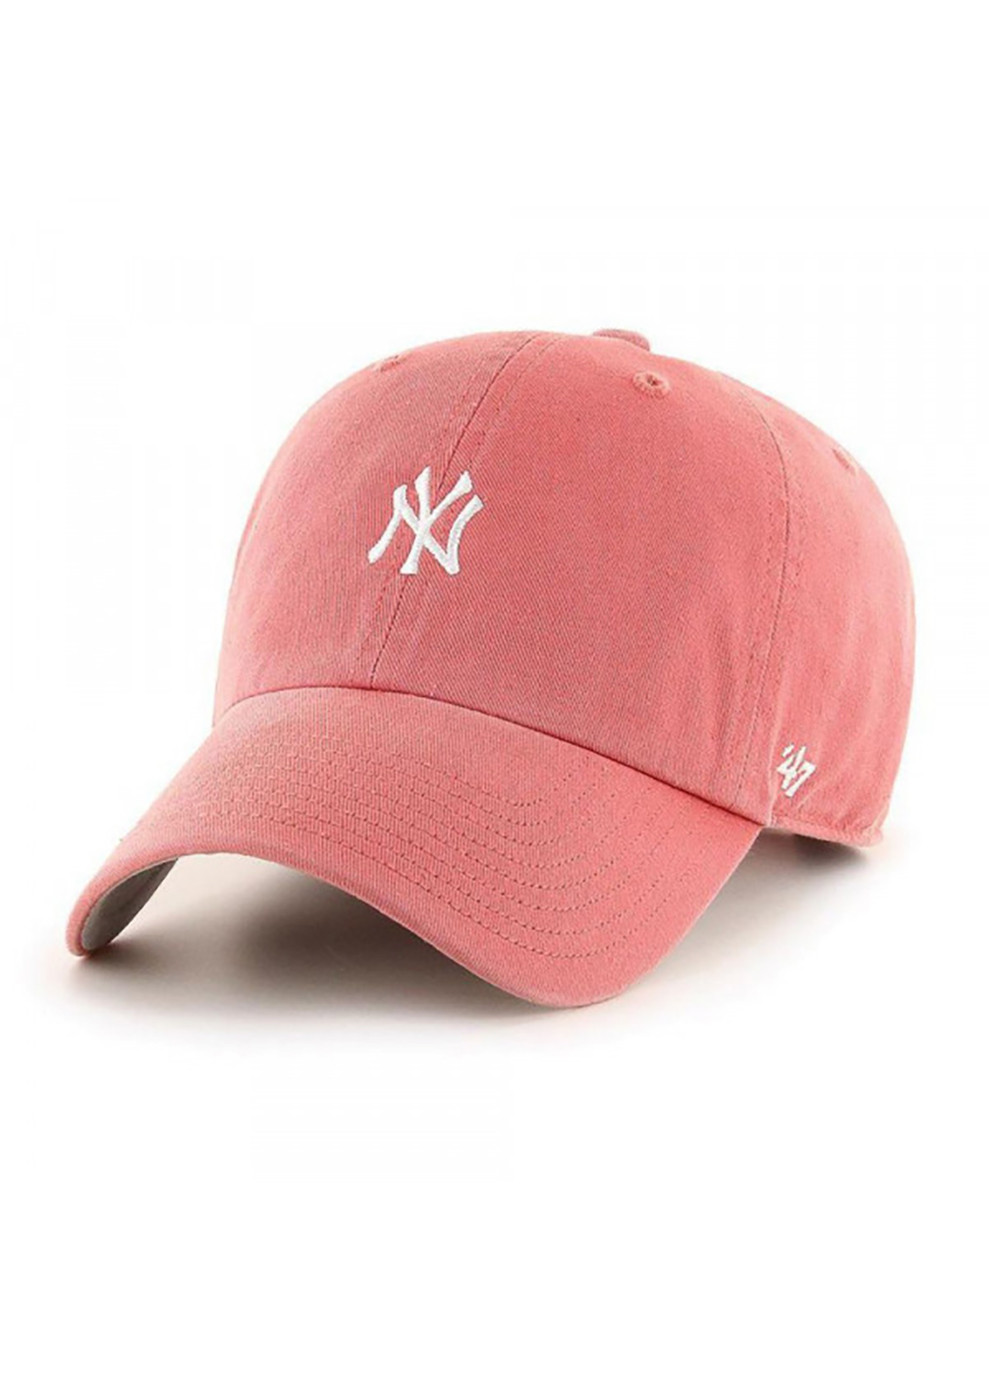 Кепка NY YANKEES BASE RUNNER One Size coral/gray B-BSRNR17GWS-IRA 47 Brand (253677851)